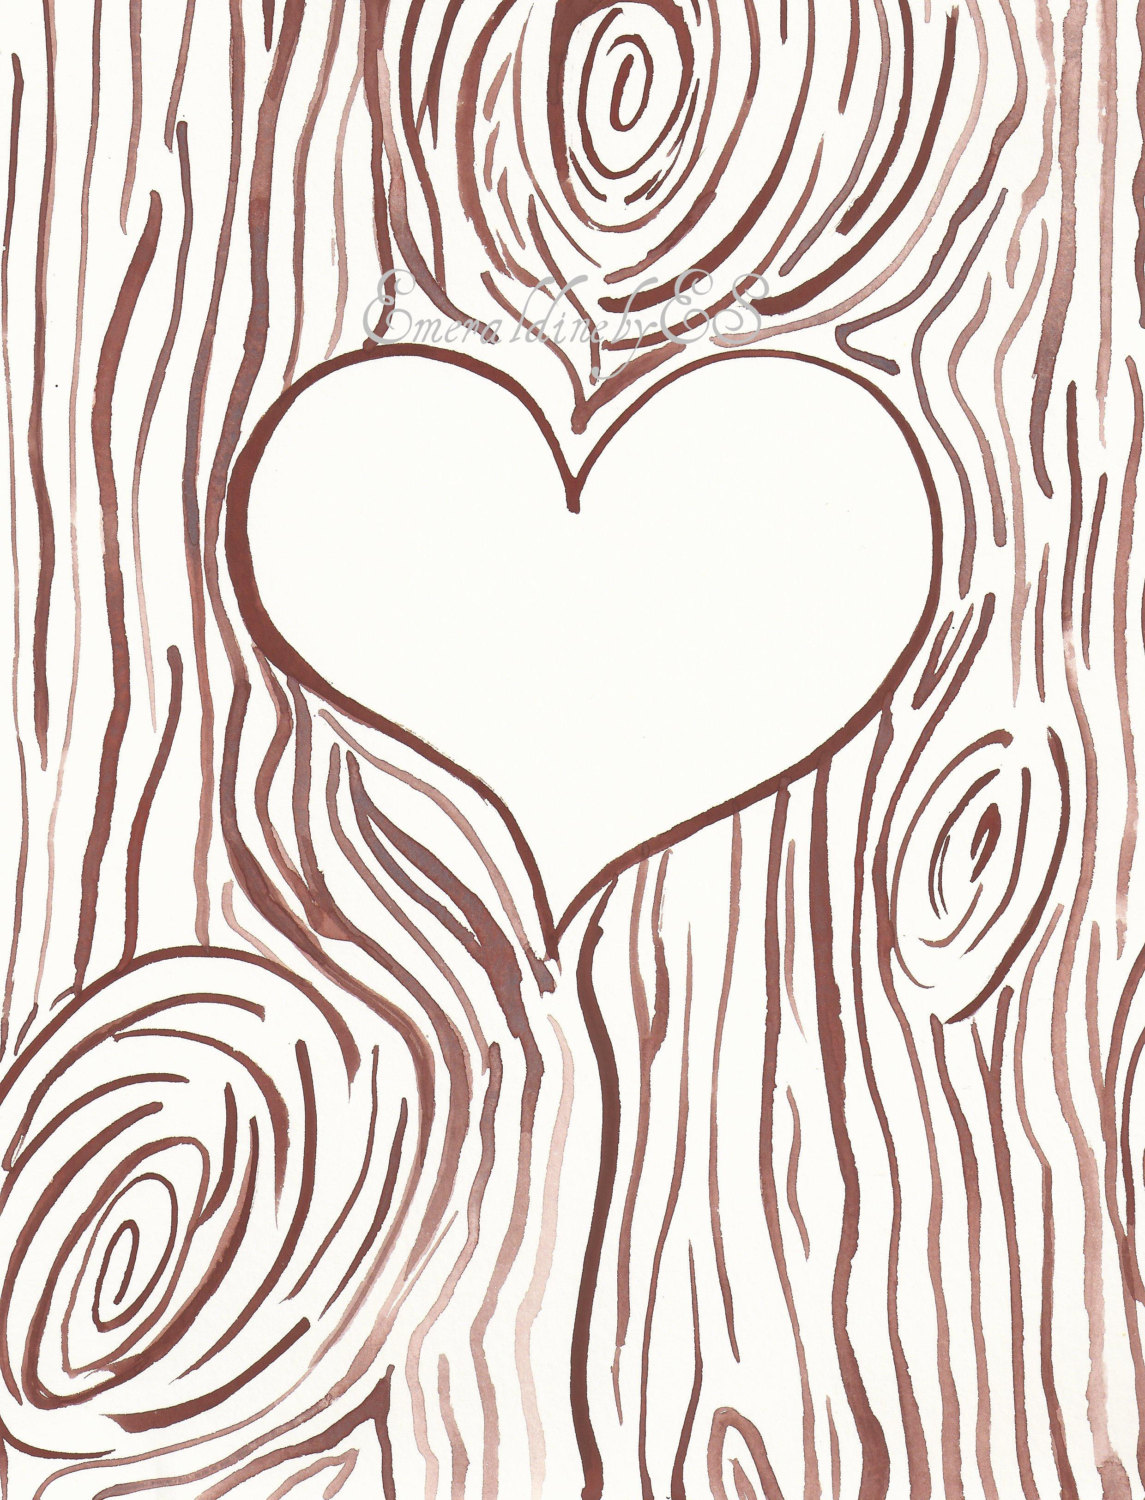 Template for Initials carved into a tree trunk JPG file